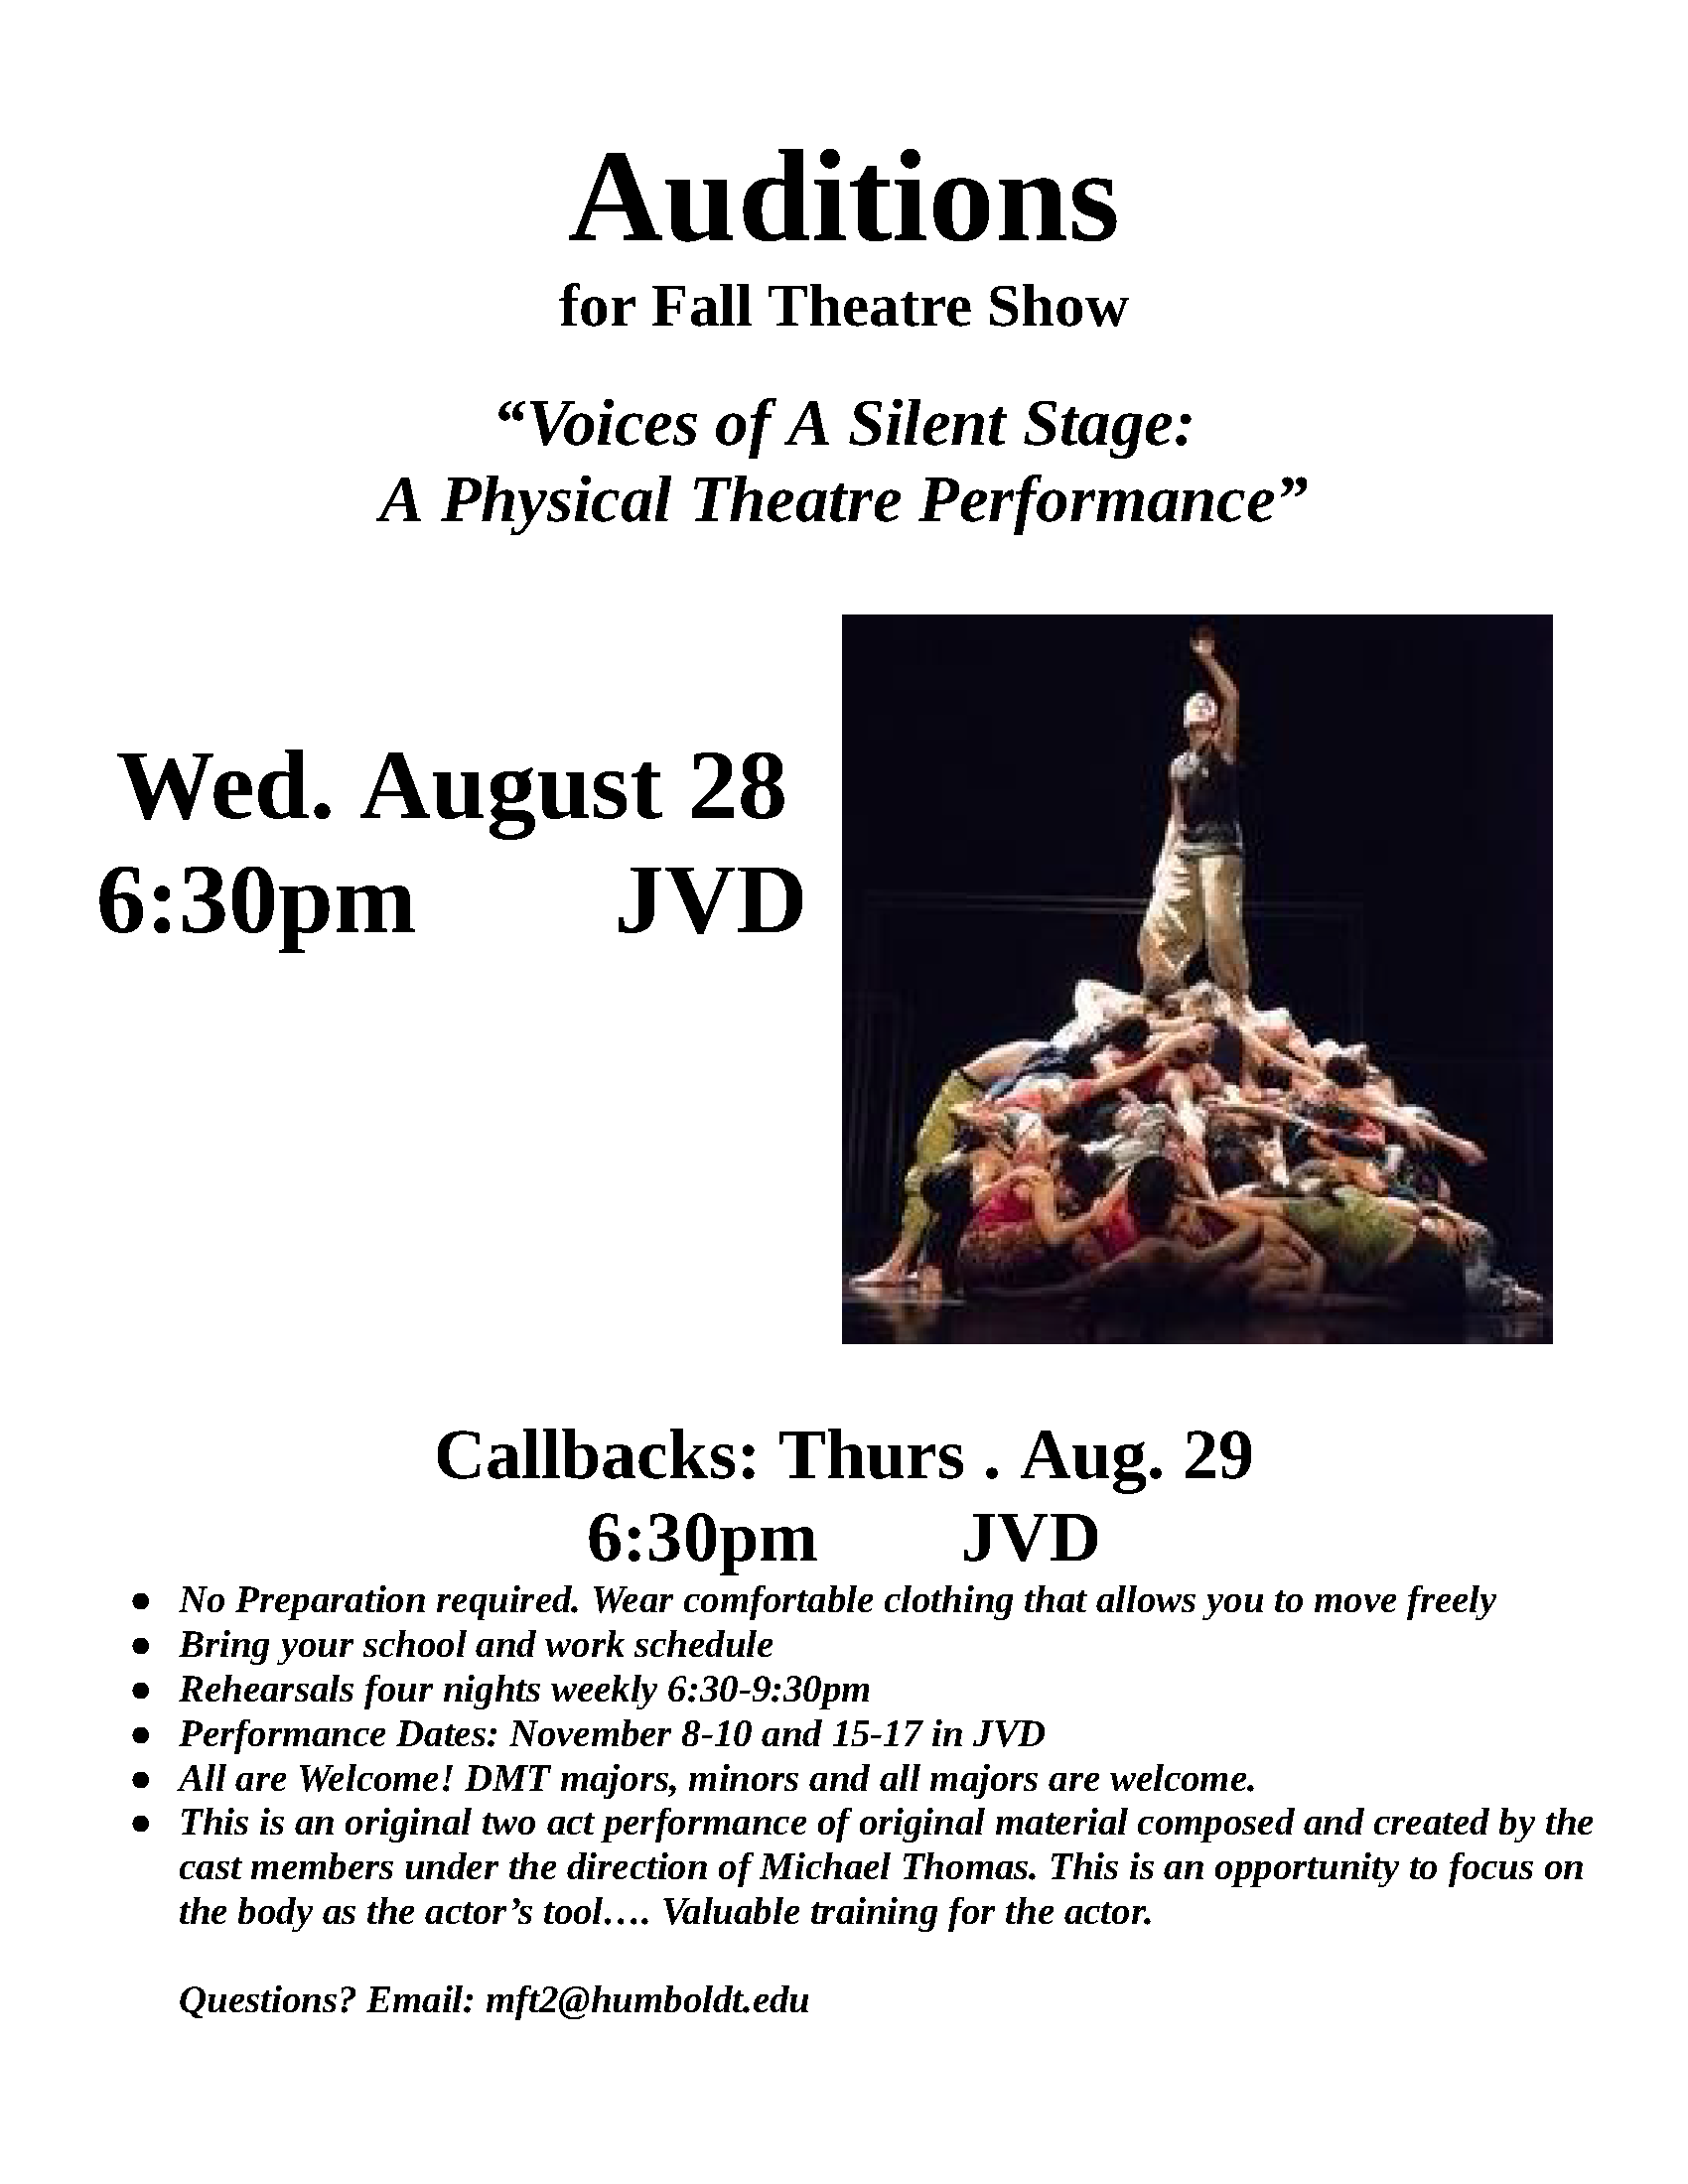 Auditions for Fall Theatre Show - "Voices of a Silent Stage: A Physical Theatre Performance" Wednesday August 28 - 6:30pm in the Van Duzer Theatre